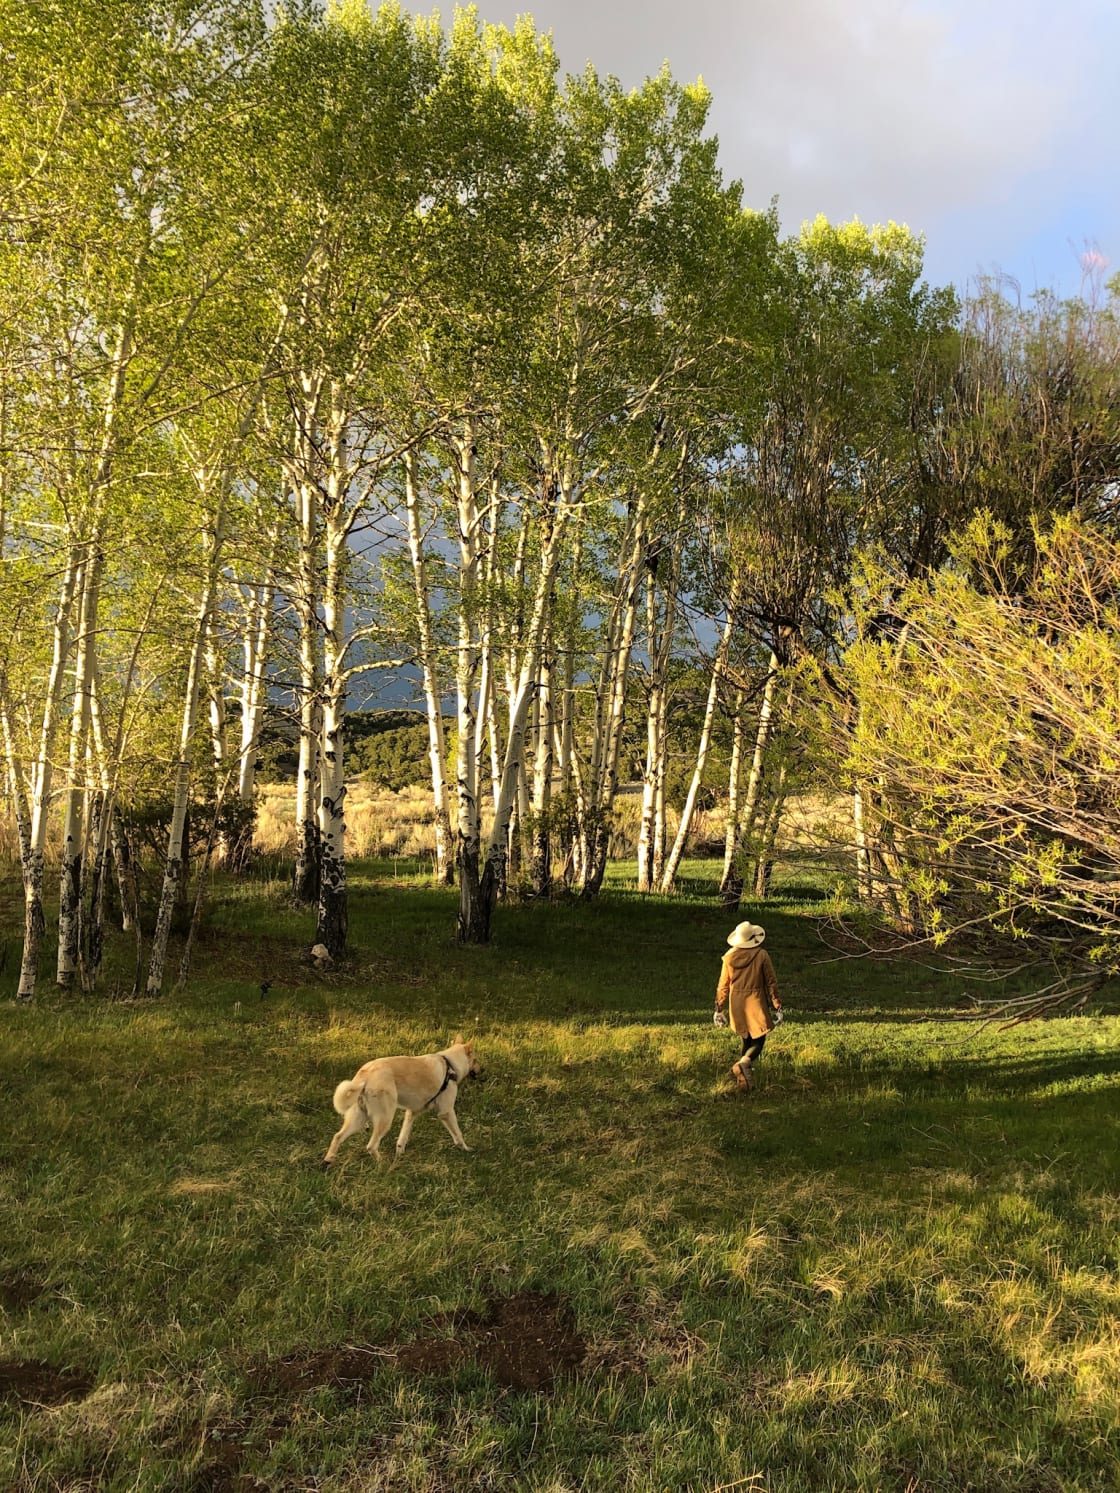 Spring and Summer on the ranch are typically quite lush, especially in the center of the property where the spring and mature trees reside